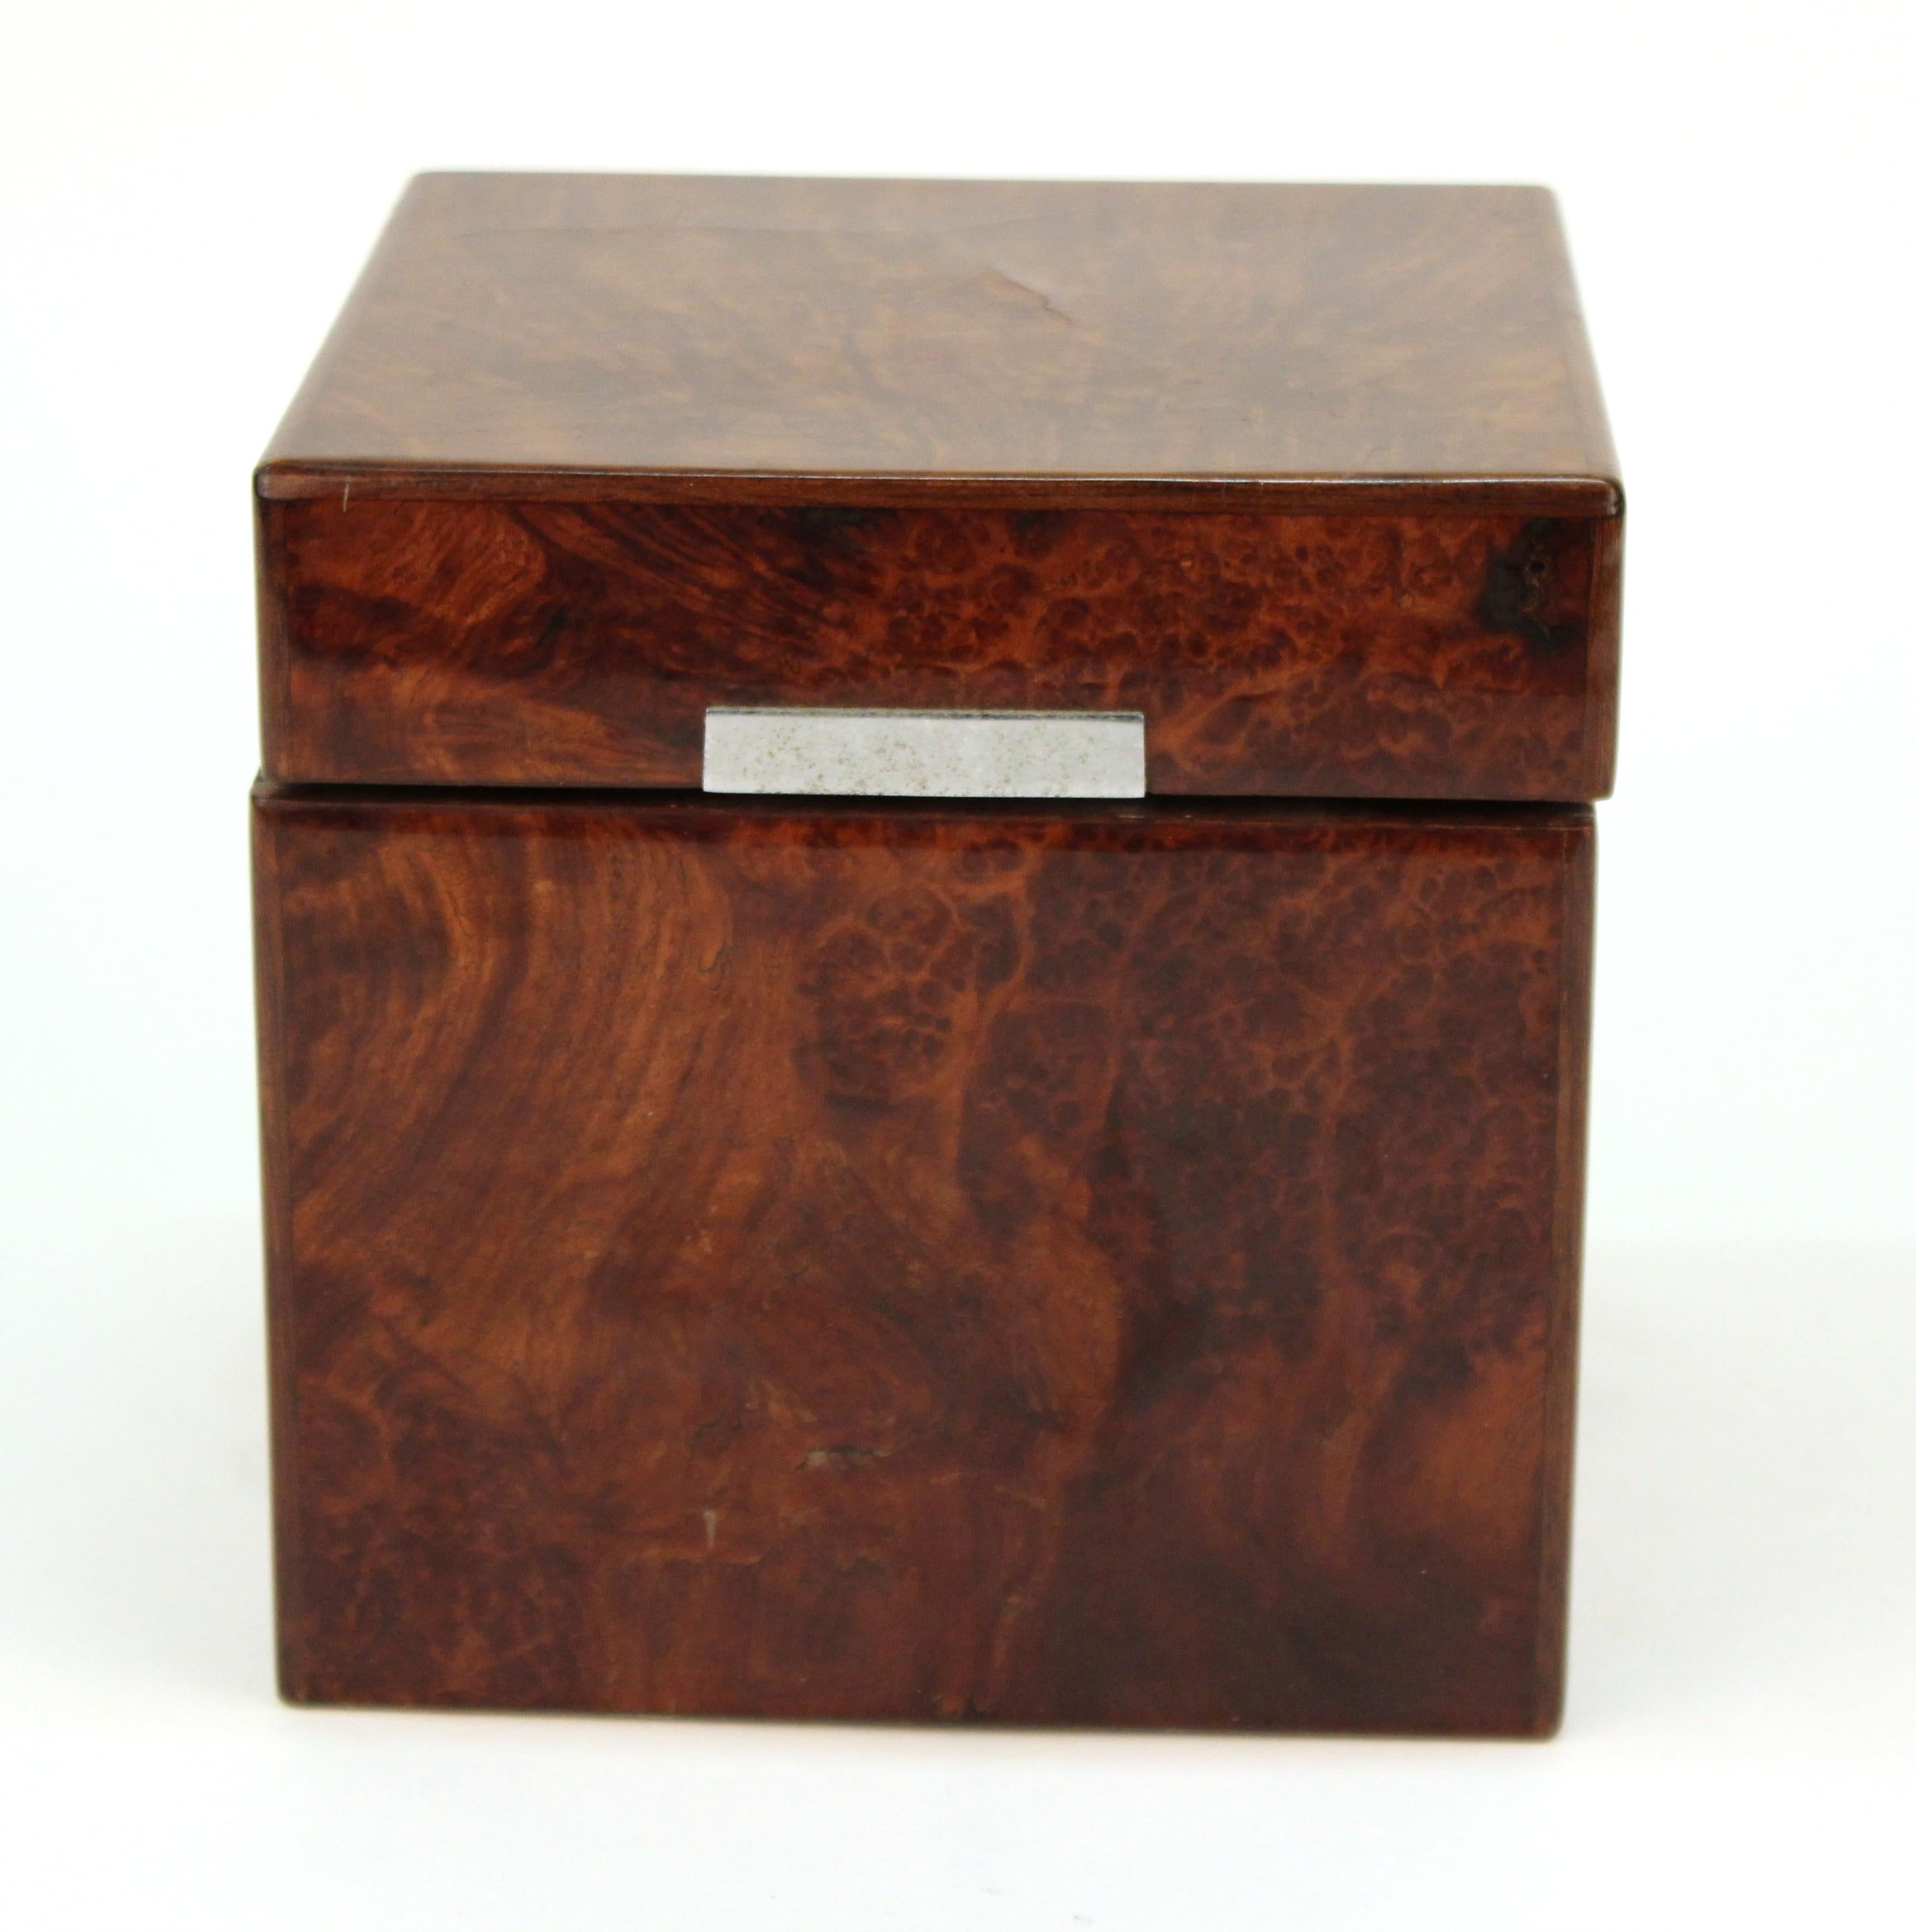 Dunhill exotic wood humidor in square form, with milk glass liner and a silvered metal moistener affixed to inner lid. The underside is marked with a 